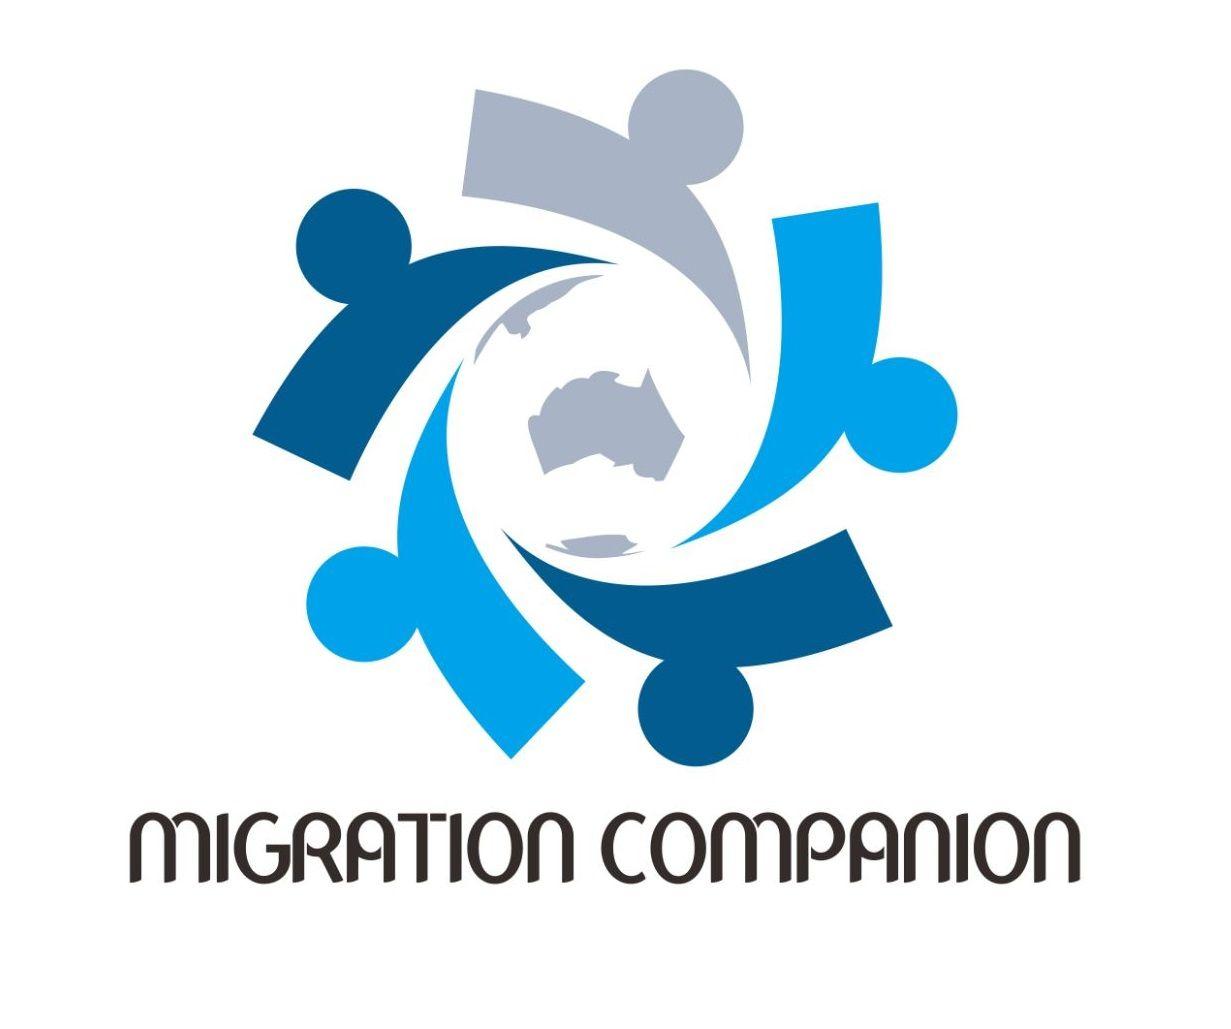 Migration Logo - Migration Company Logo's Birthday And Multicultural Festival